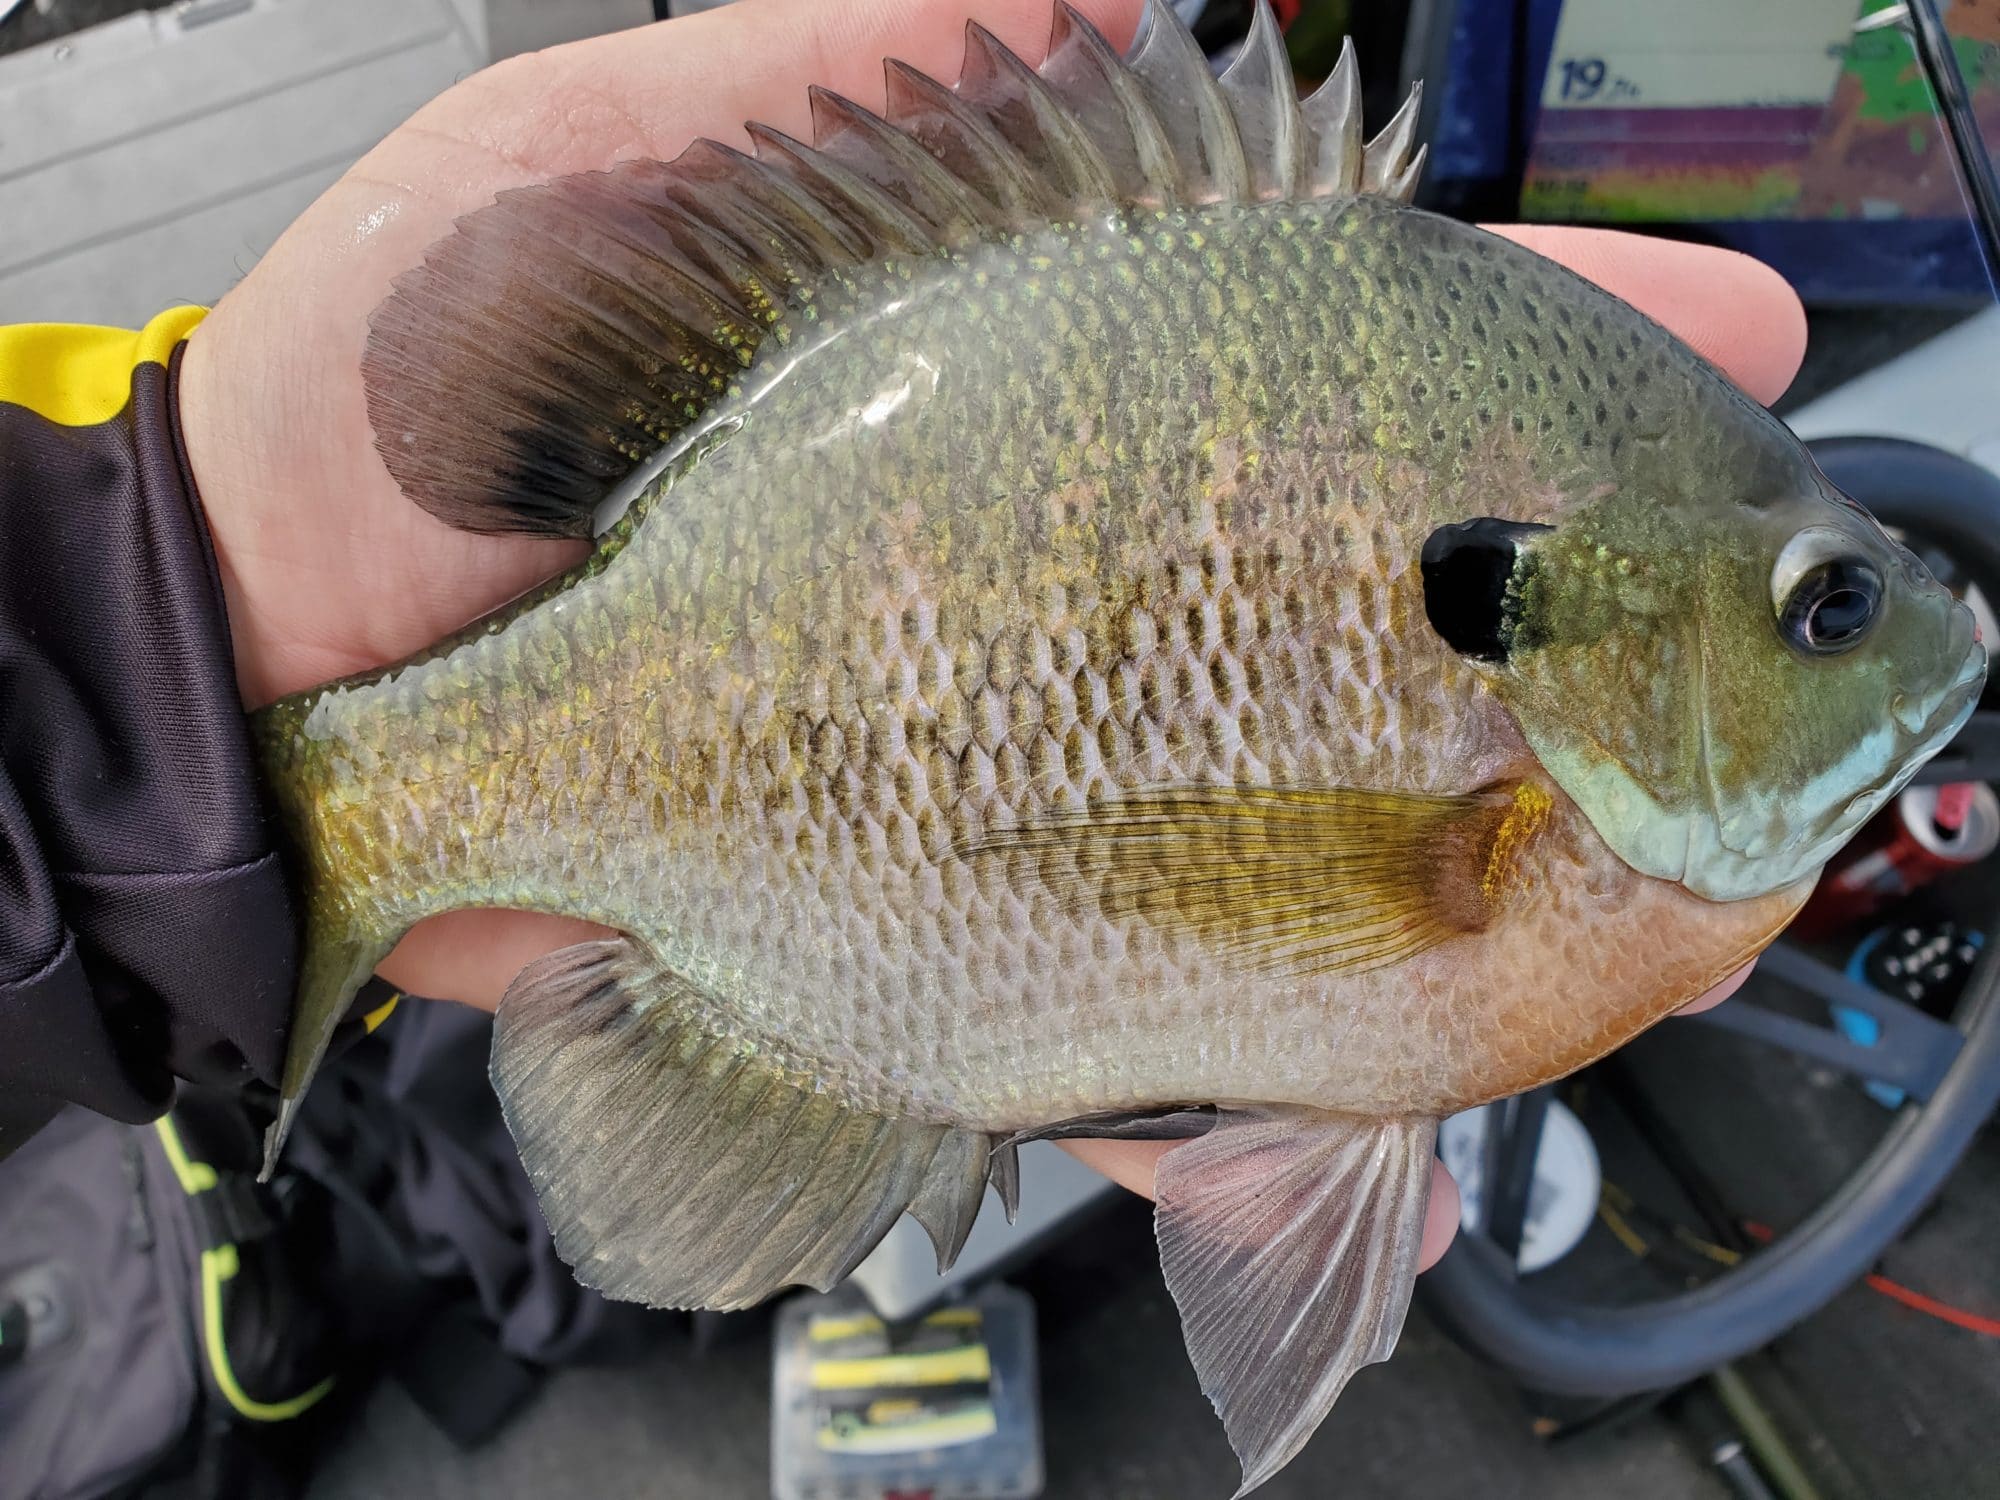 Early Autumn is a great time to chase Big bluegills and Bass